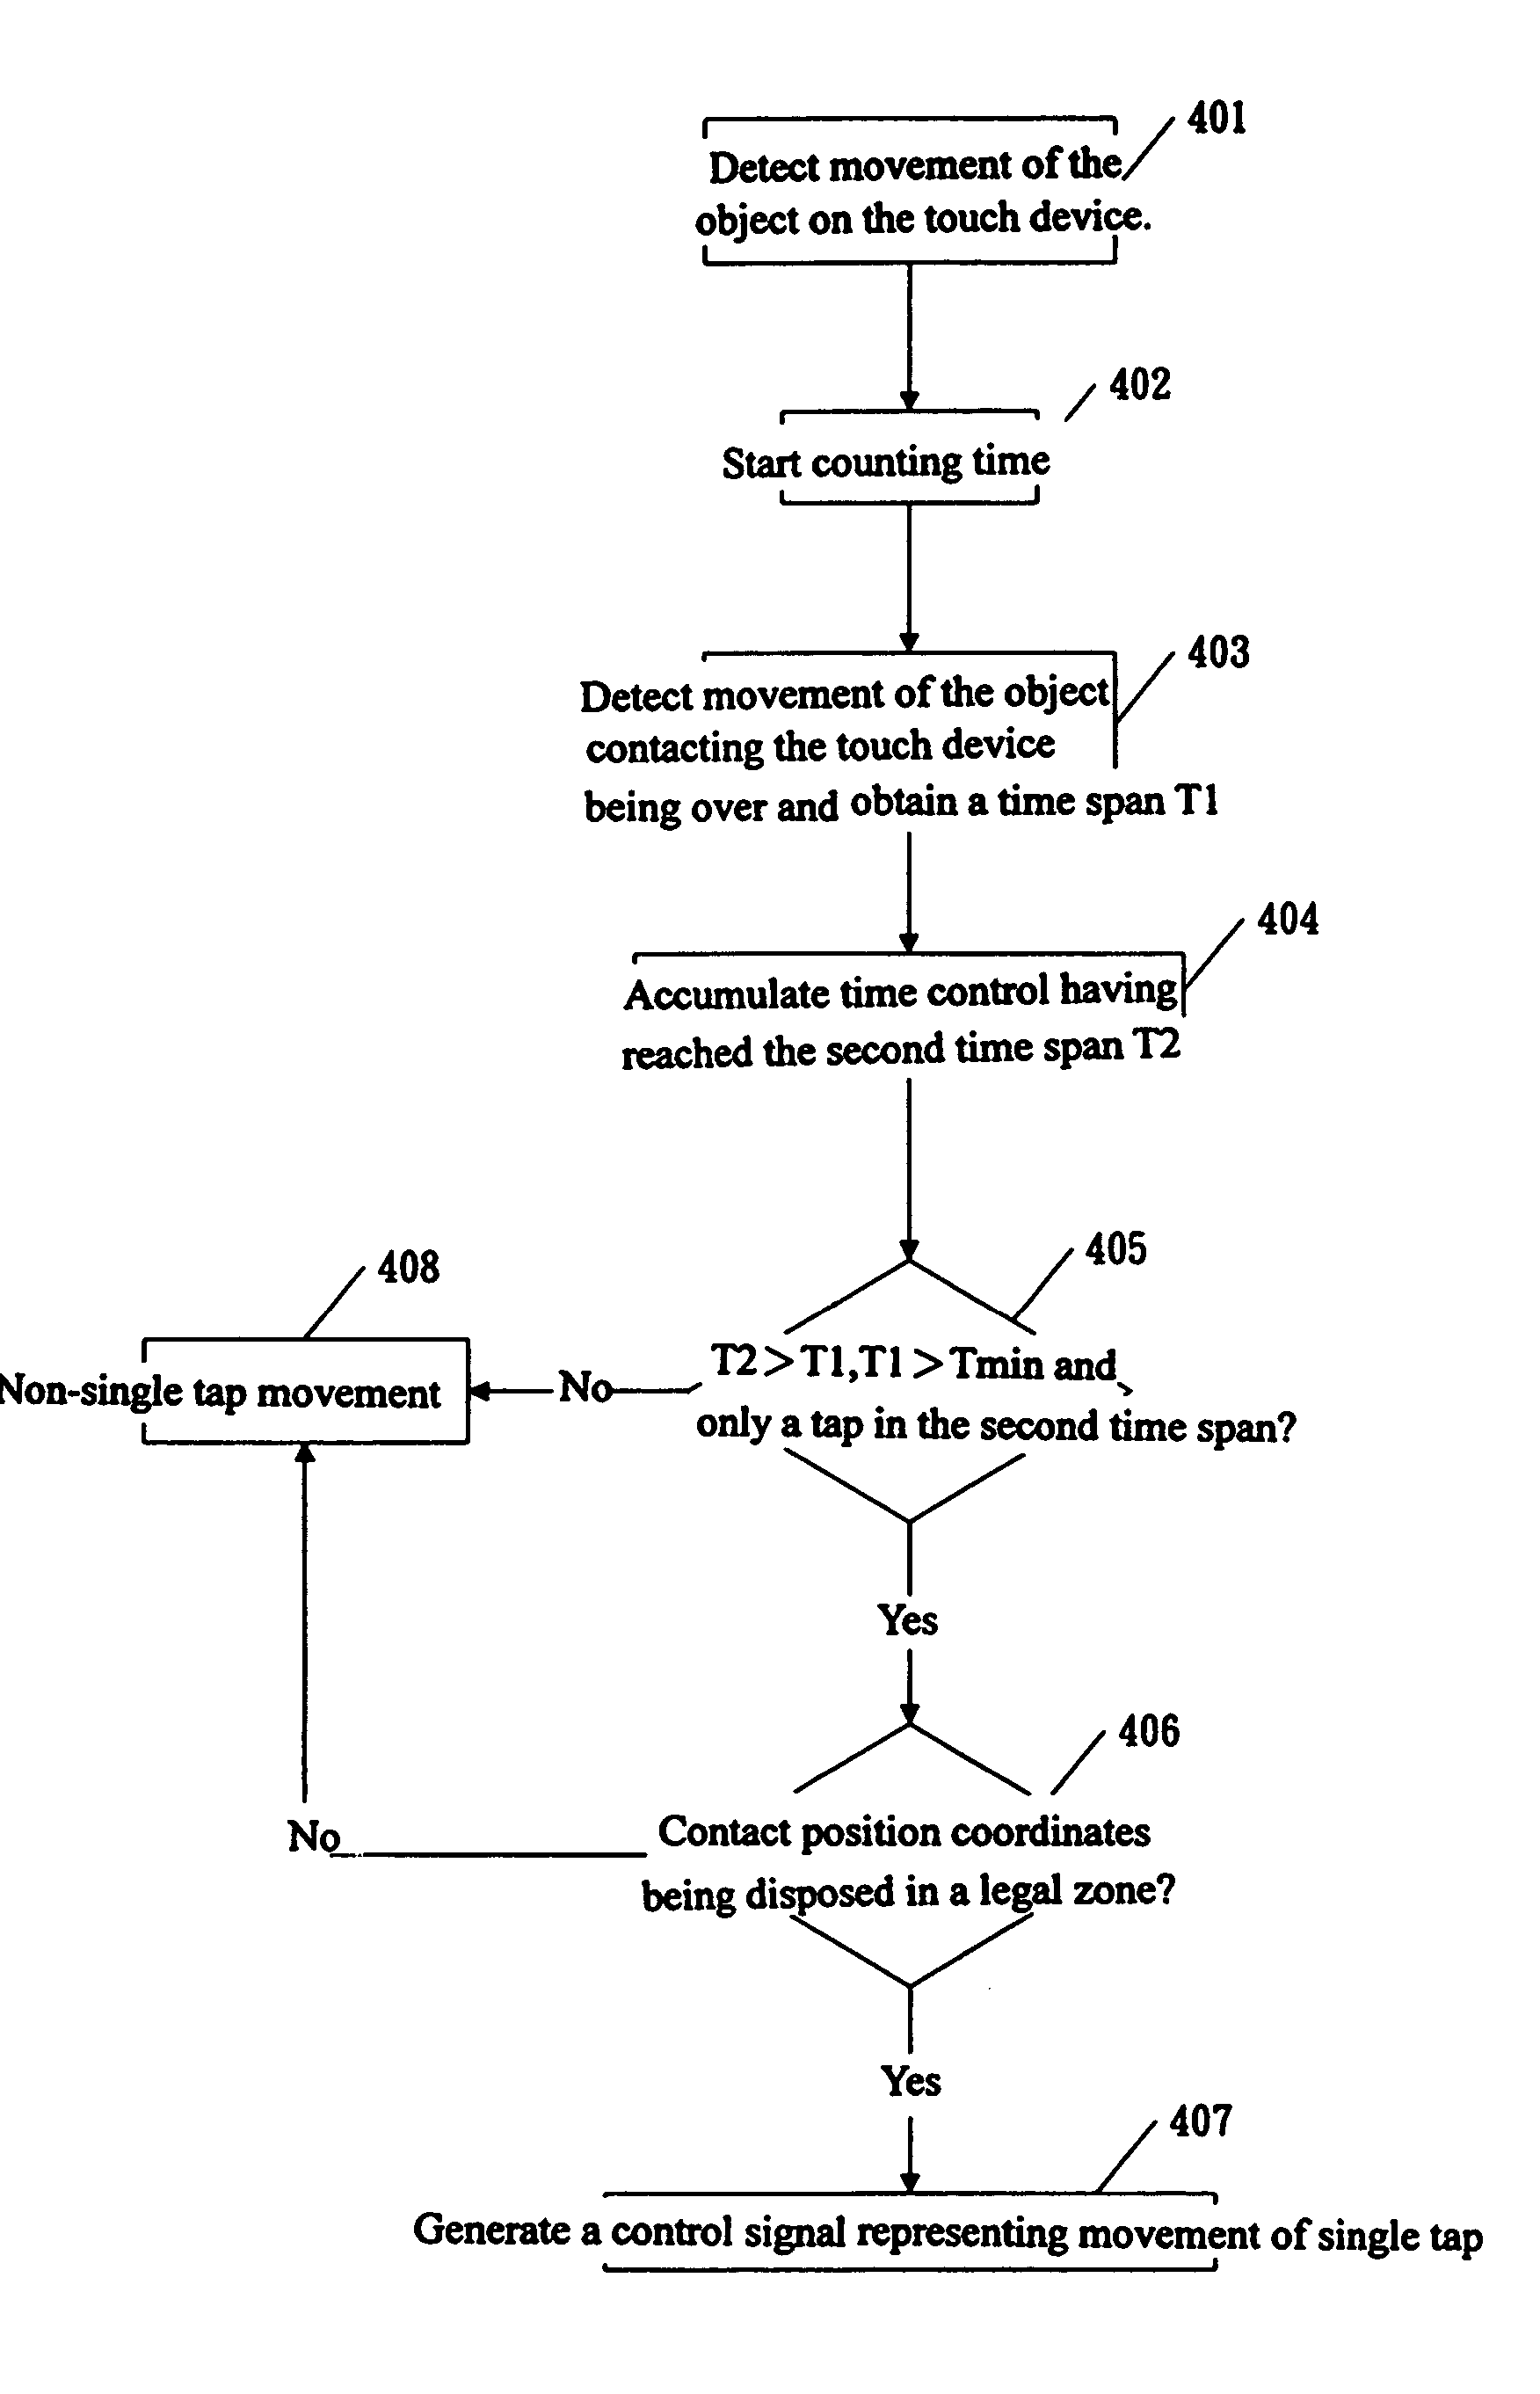 Method for identifying a movement of single tap on a touch device